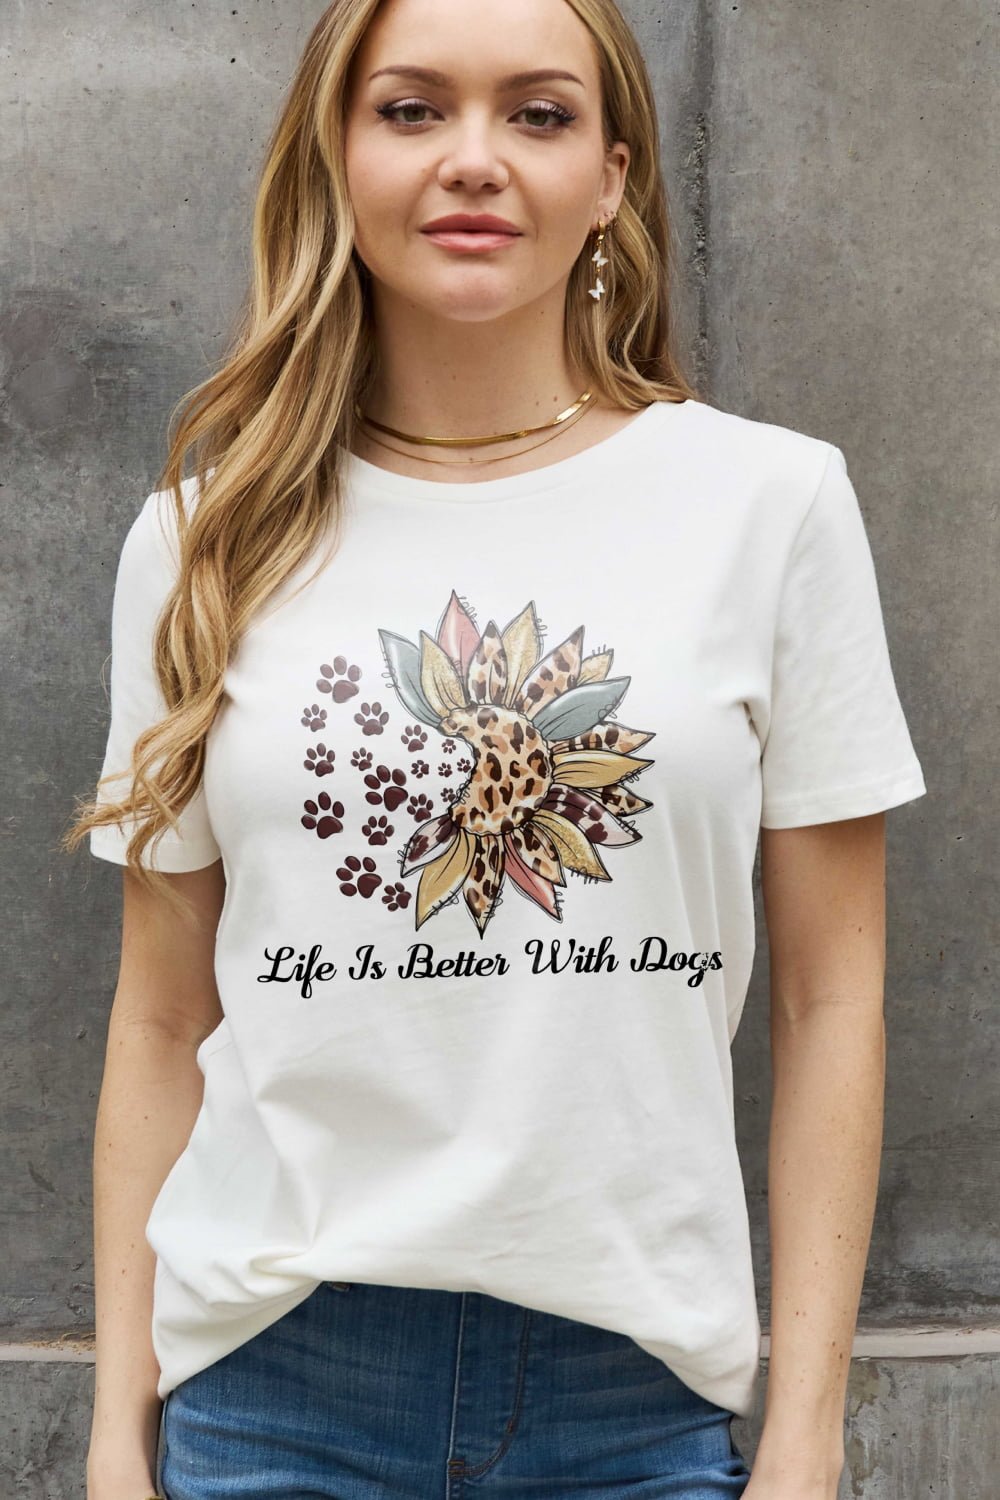 LIFE IS BETTER WITH DOGS Cotton Tee - Tangerine Goddess